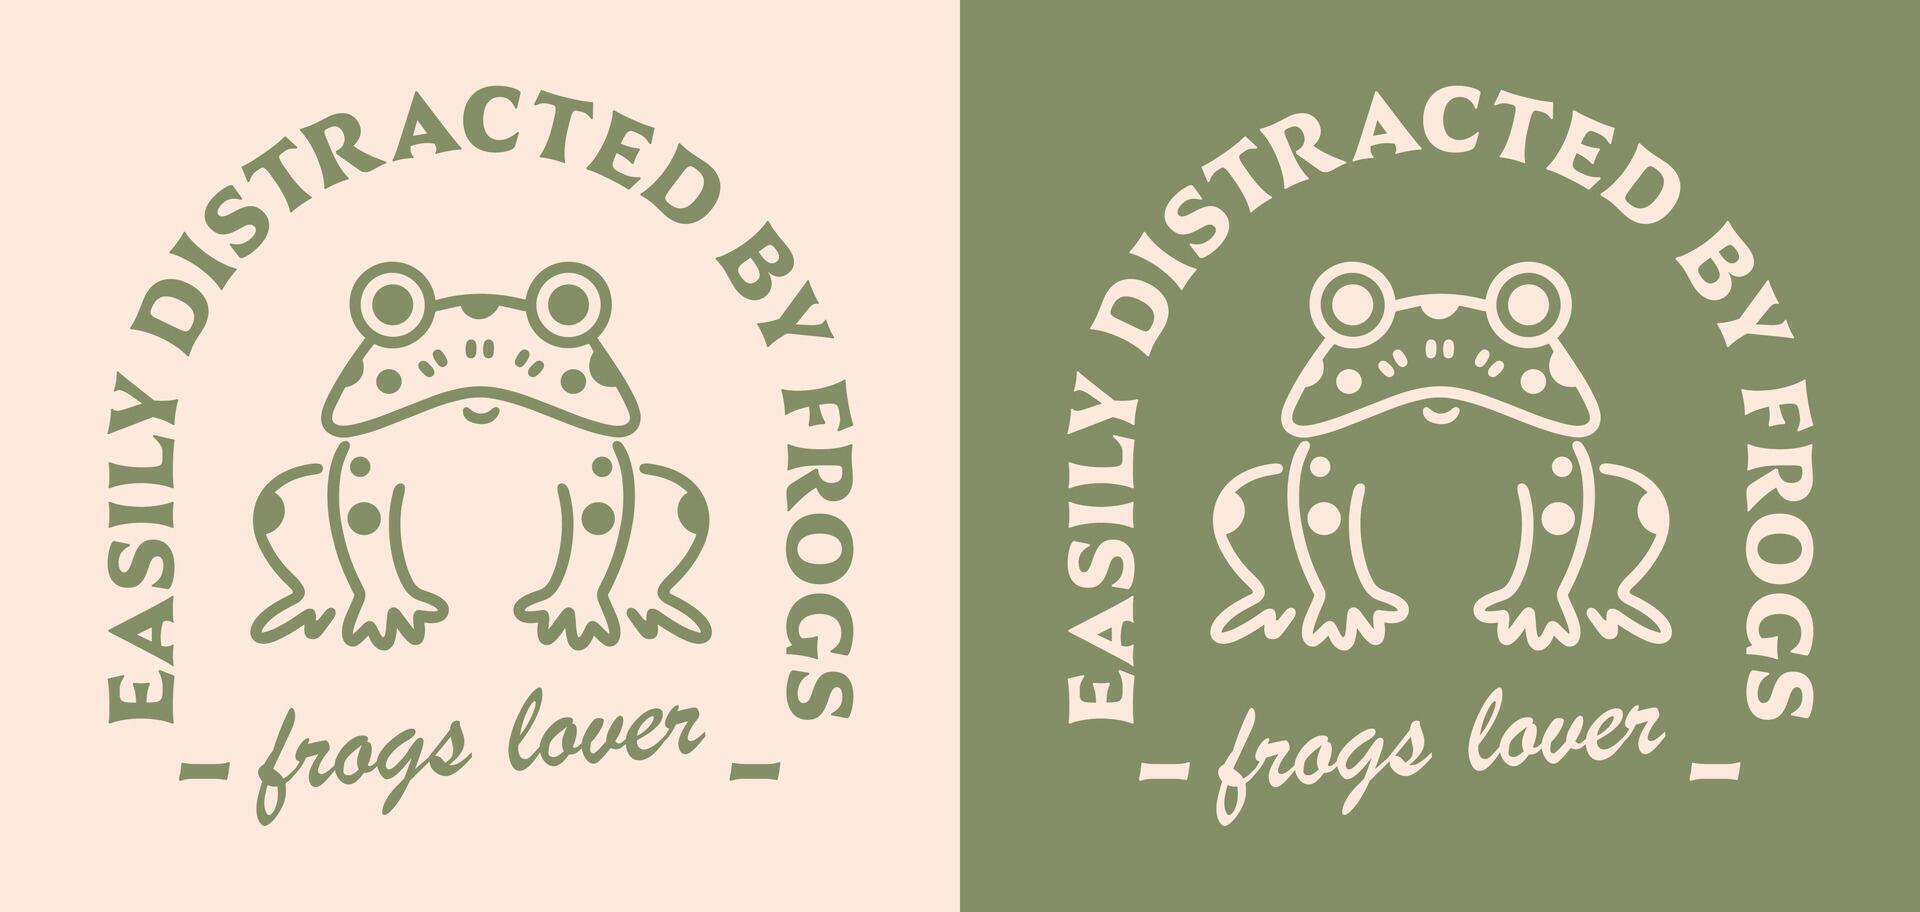 Frog lover club logo quotes lettering badge sticker easily distracted by frogs cute green cottagecore frogcore goblincore toad aesthetic funny gifts text for shirt design printable cut file vector